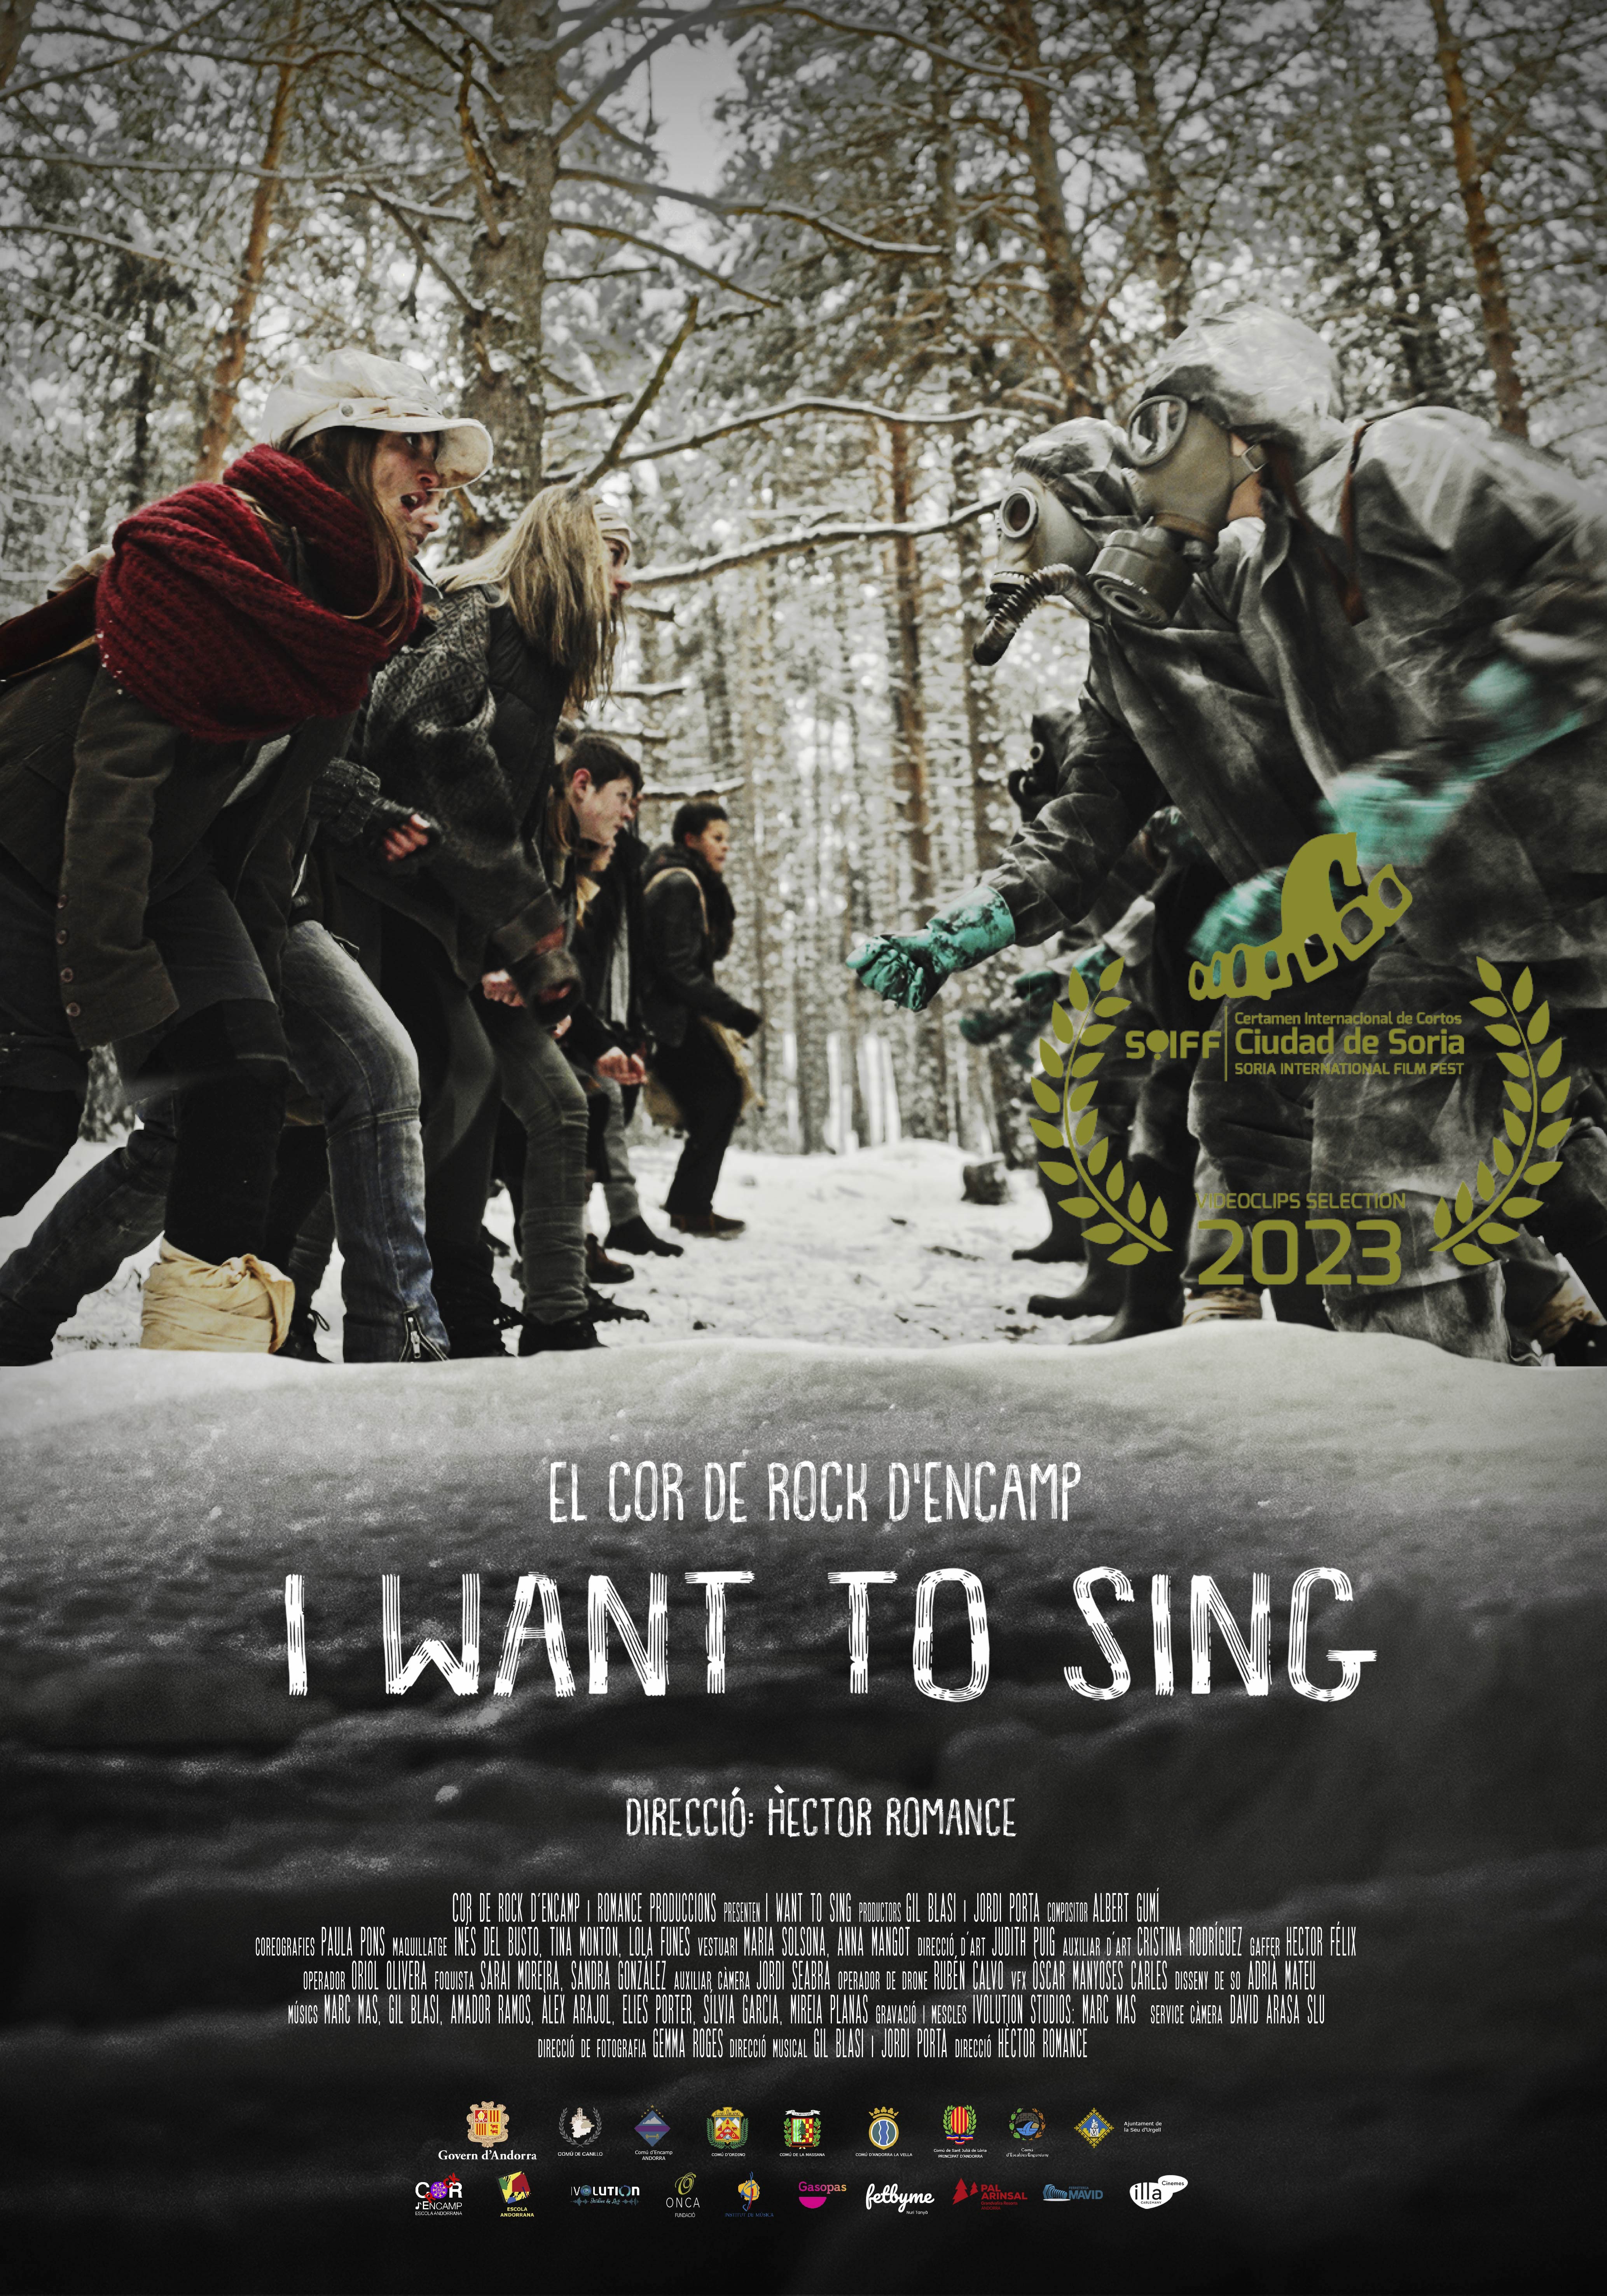 Official I WANT TO SING POSTER LAUREL